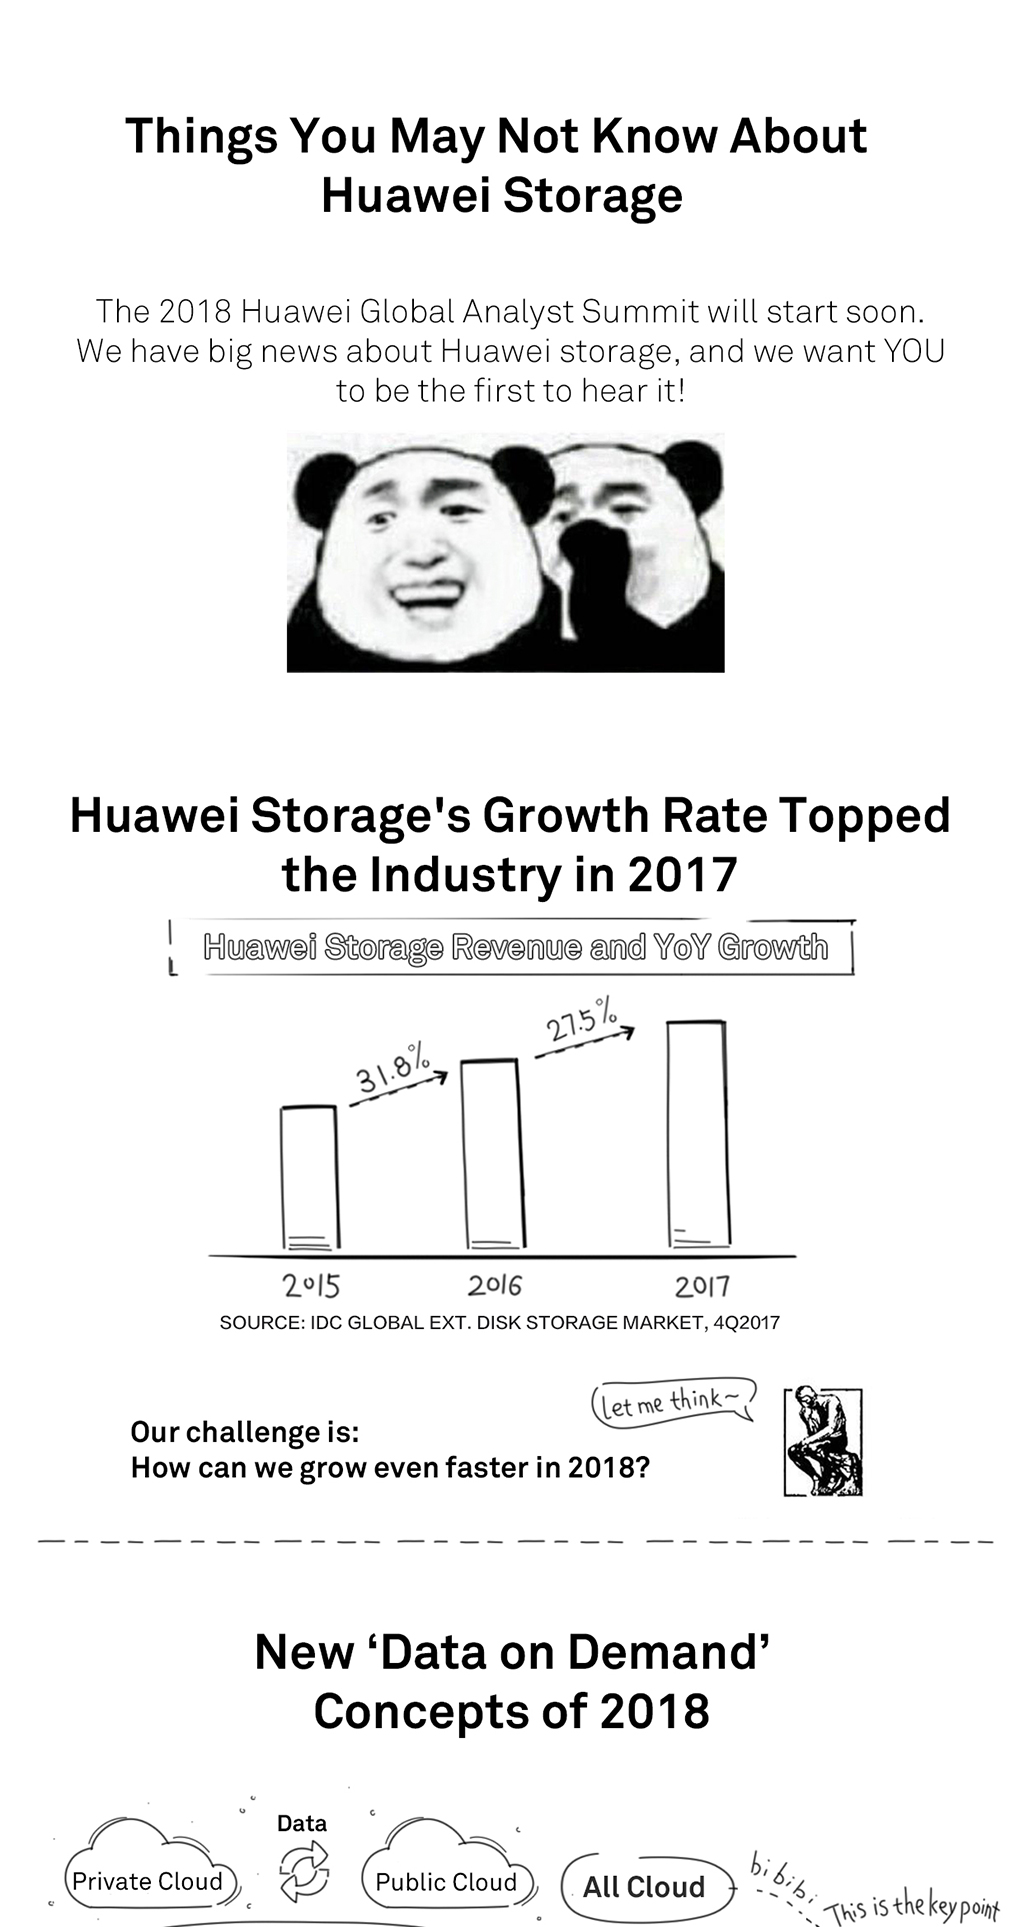 Things You May Not Know About Huawei Storage